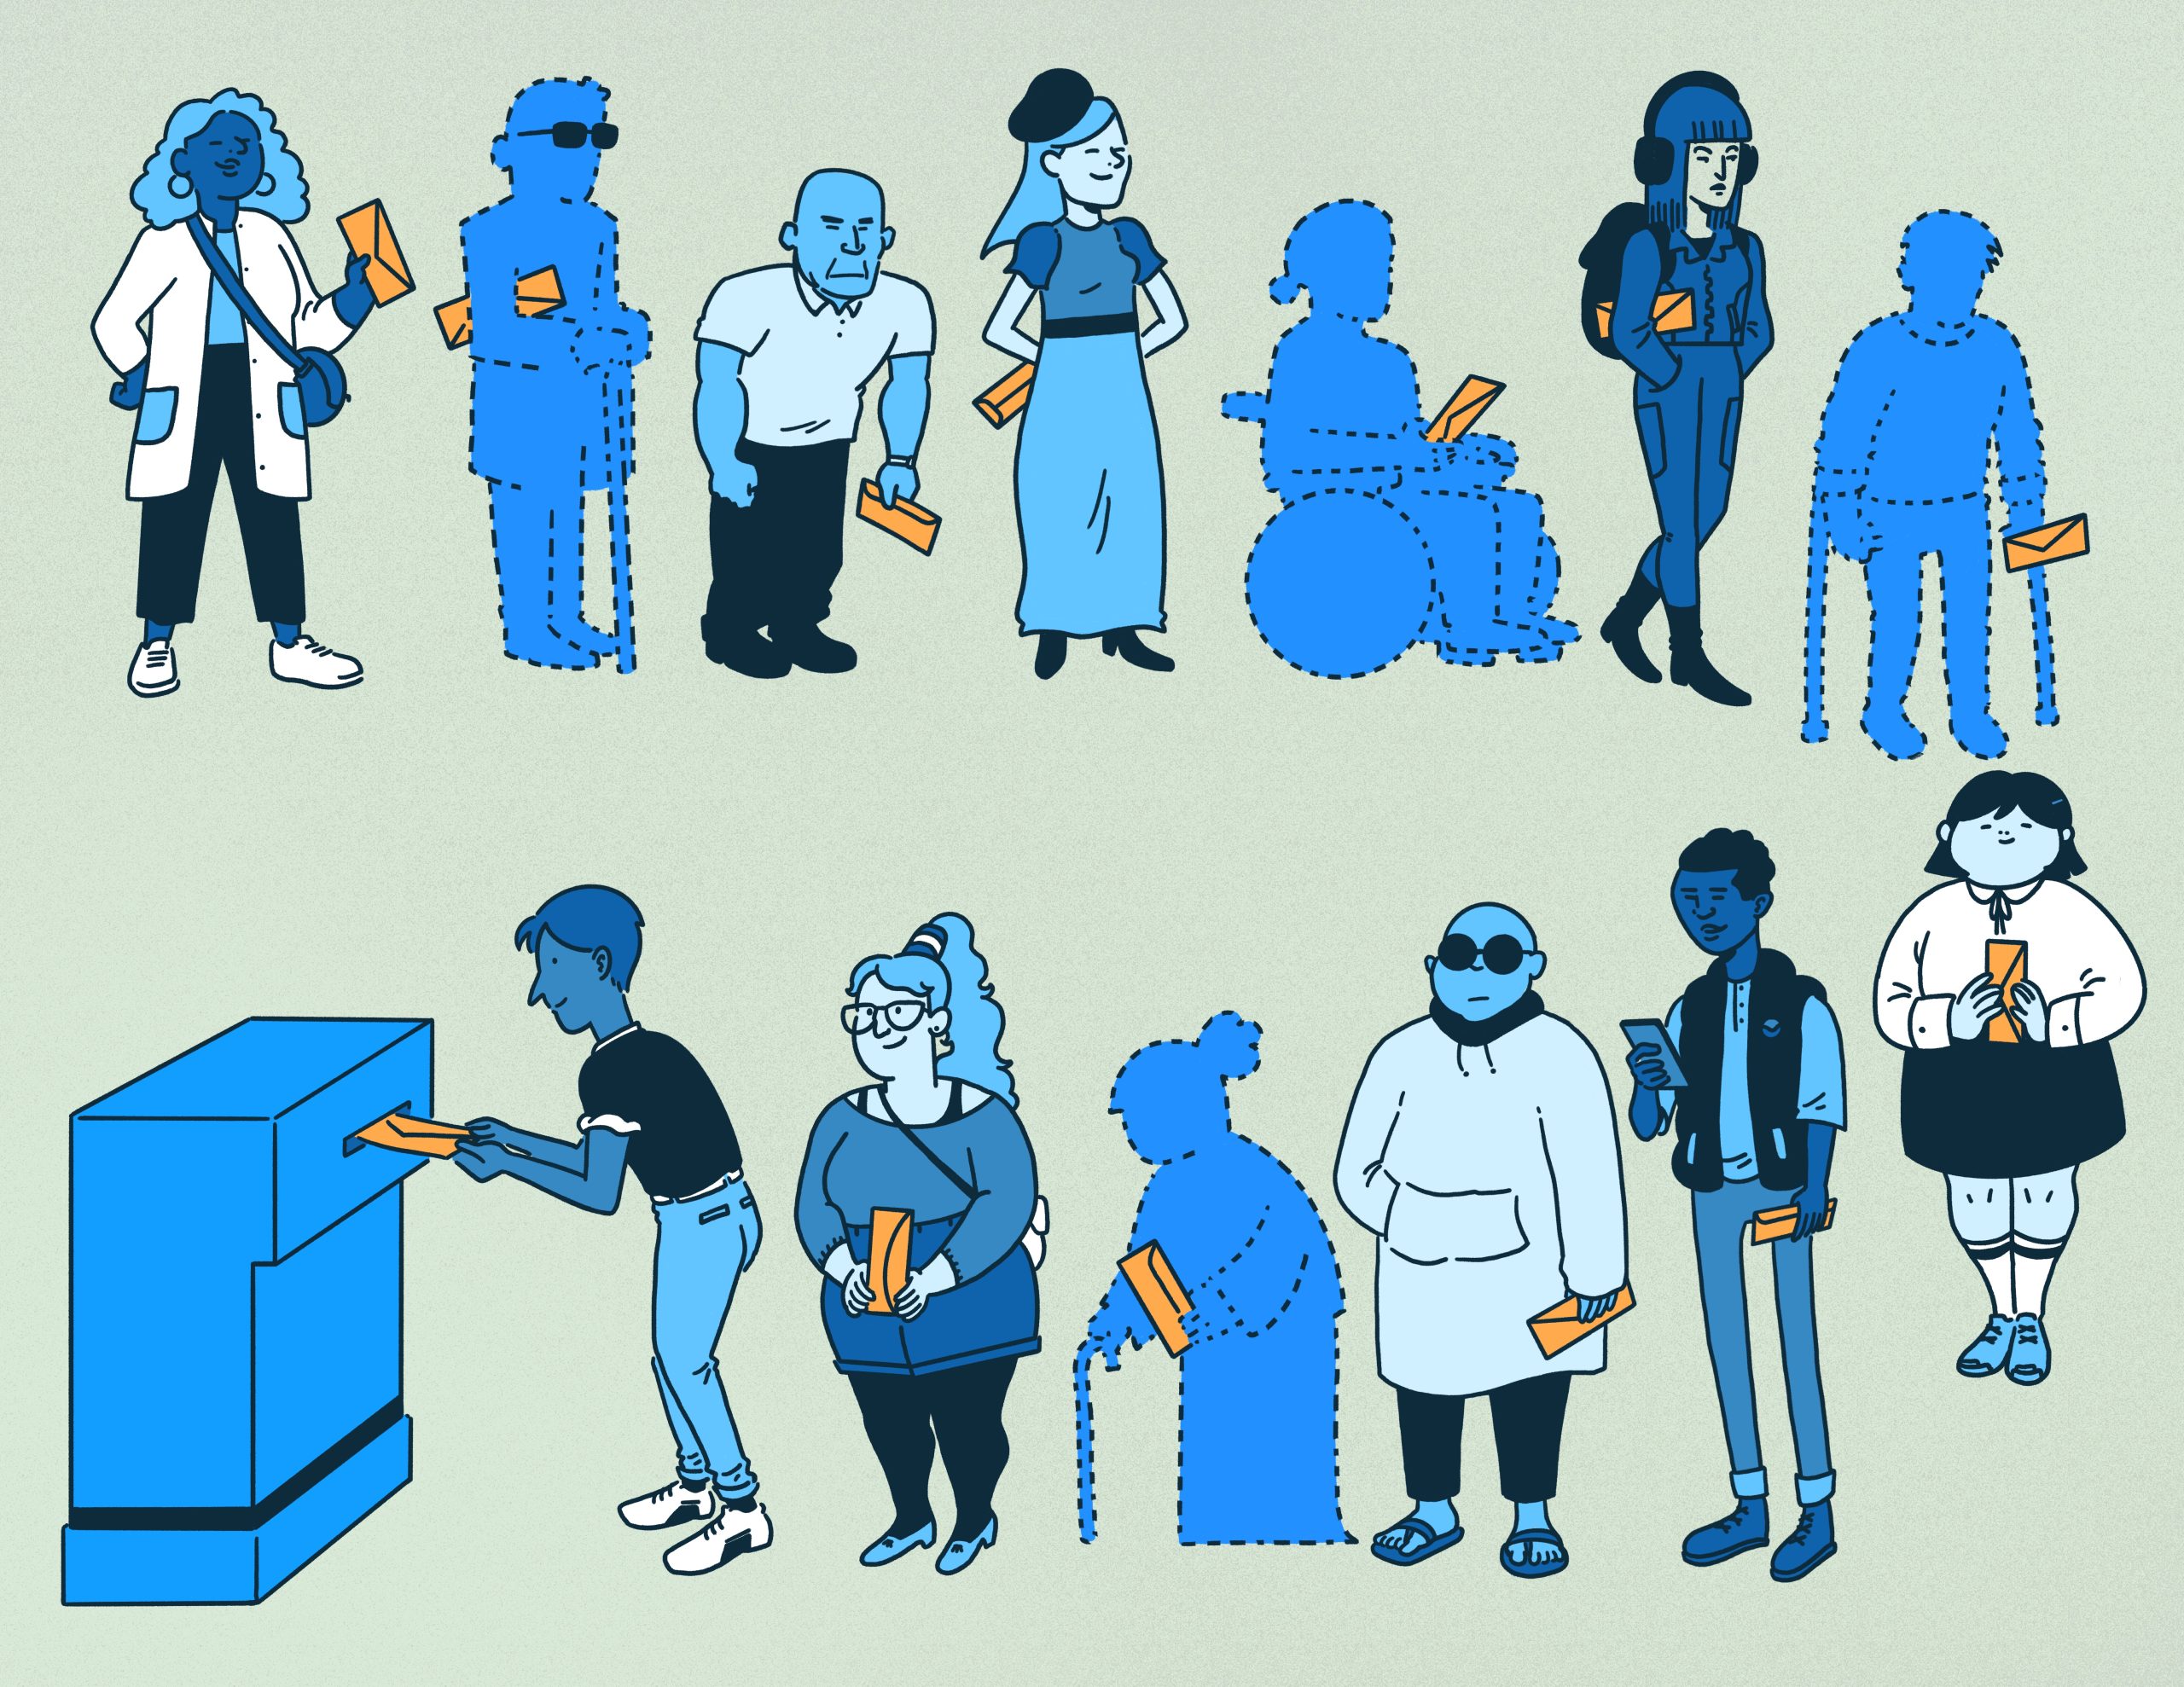 An illustration depicts a variety of people waiting in line to deposit ballots in a drop box. Some people appear only as dotted outlines.